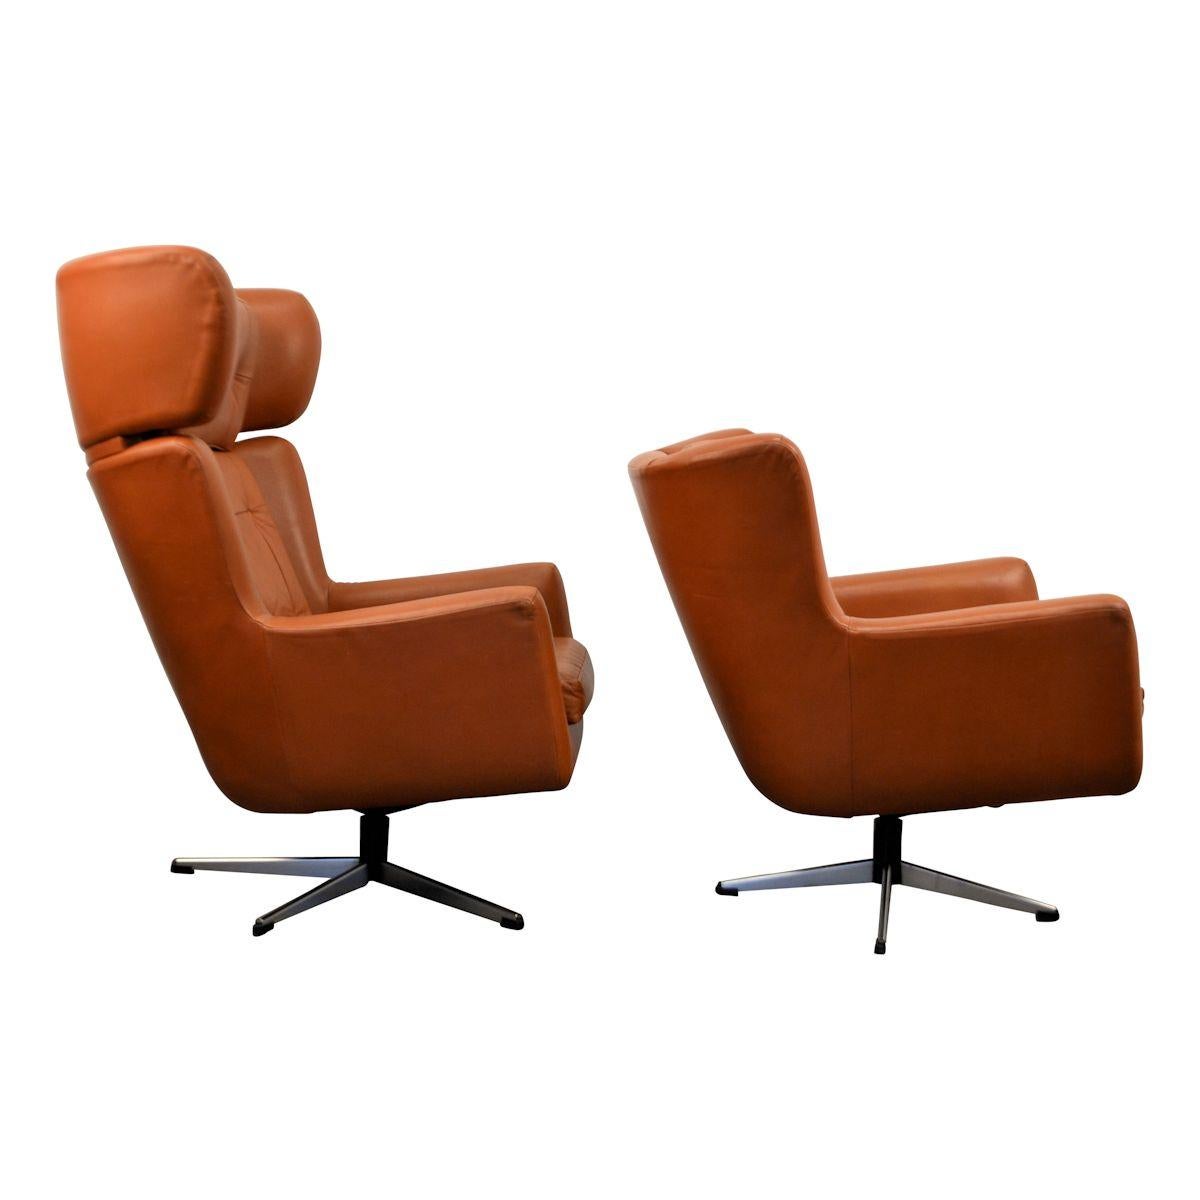 Set of two Danish modern leather lounge chairs designed and manufactured by Skjold Sørensen, Denmark. These brown leather swivel chairs on a steel frame feature a typical vintage design, offer a great level of comfort and padded backrests. The set